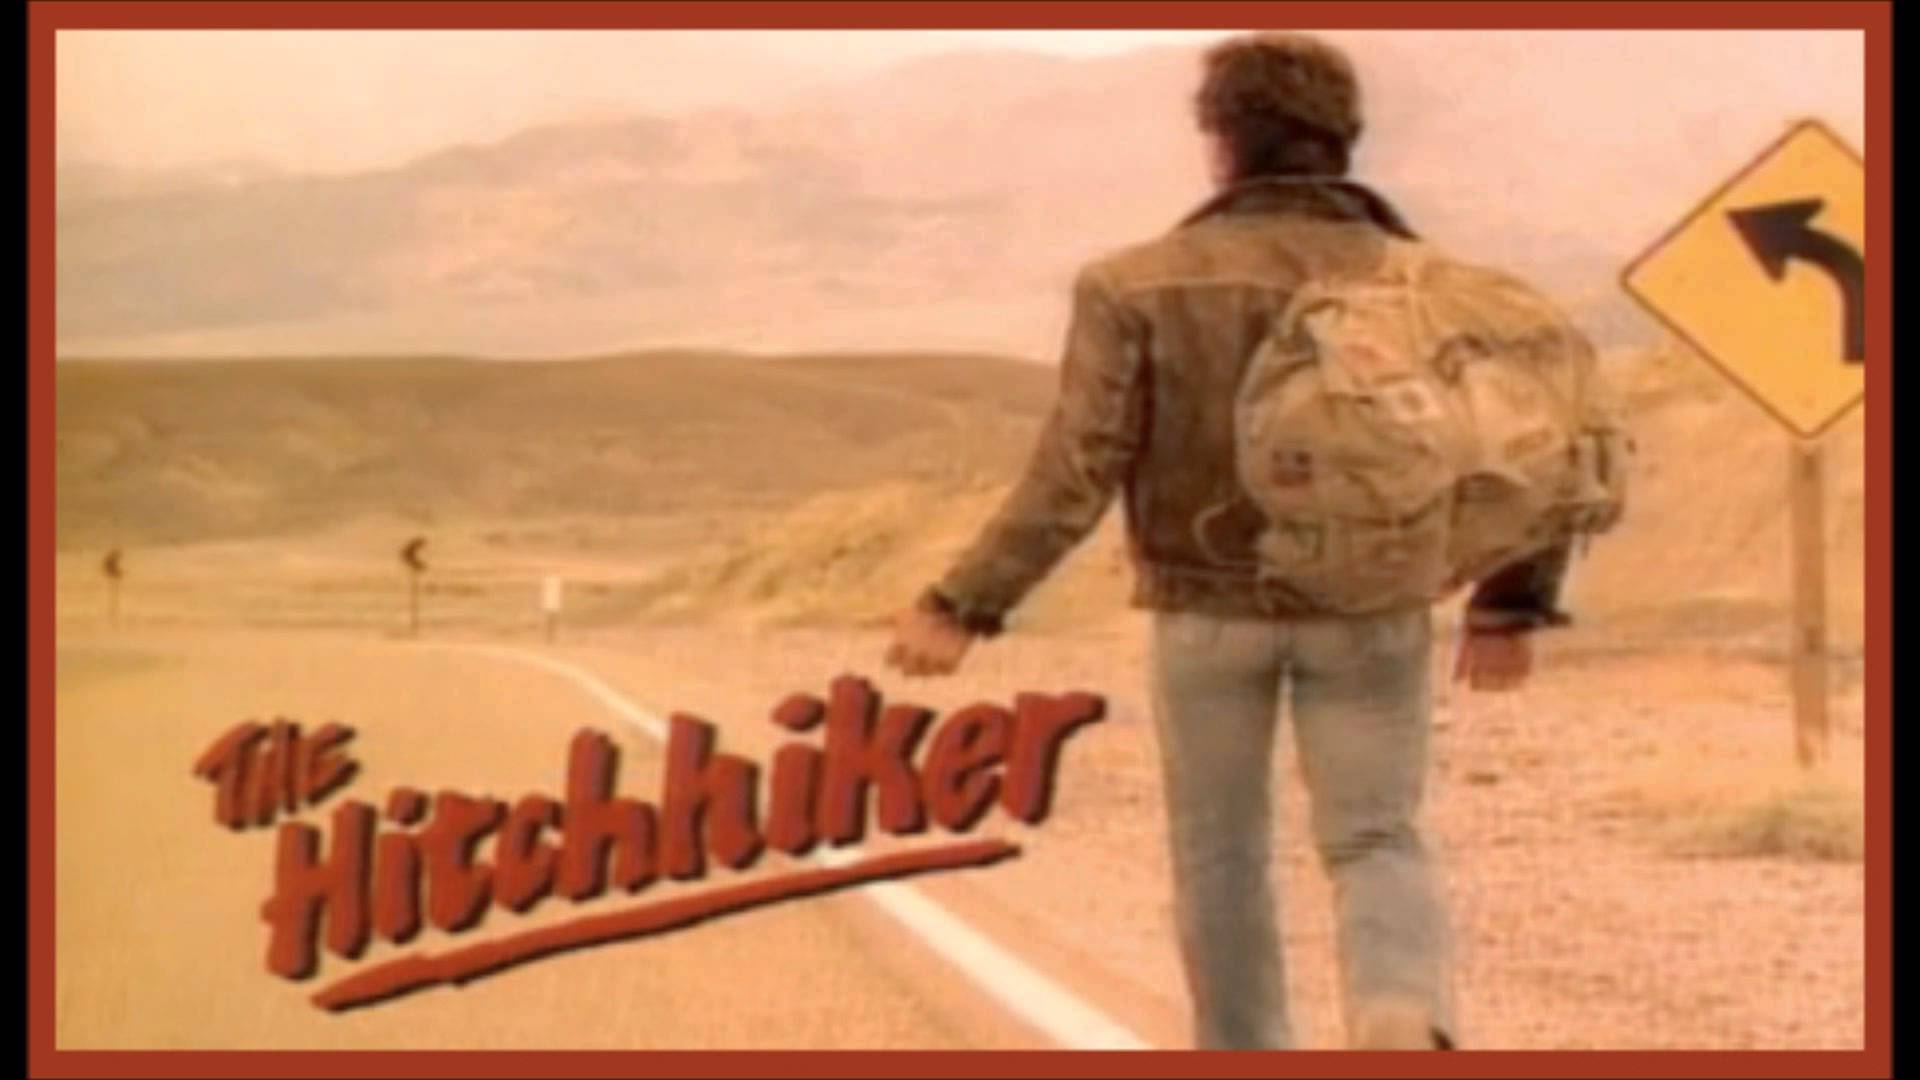 Theme The Hitchhiker - YouTube